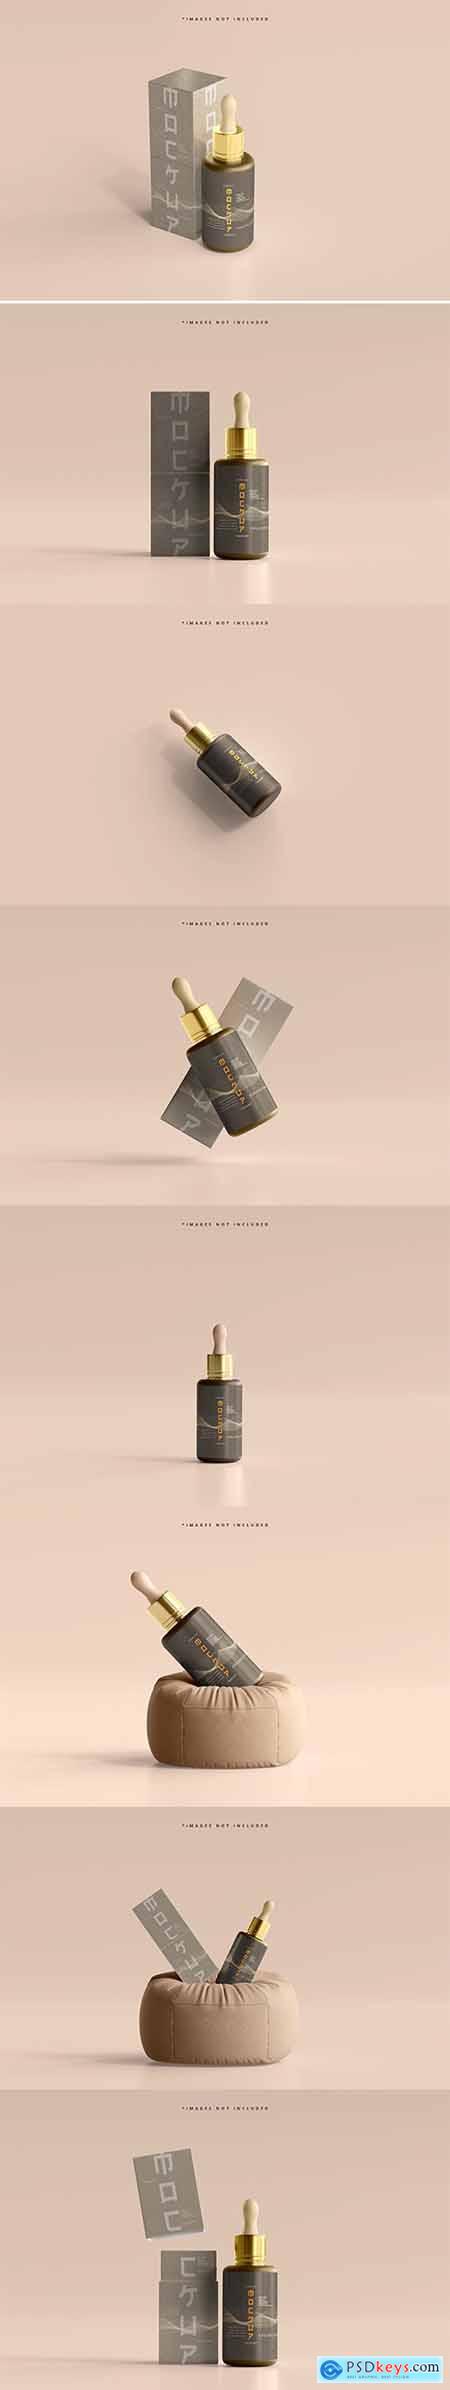 Cosmetic dropper bottle and box mockup